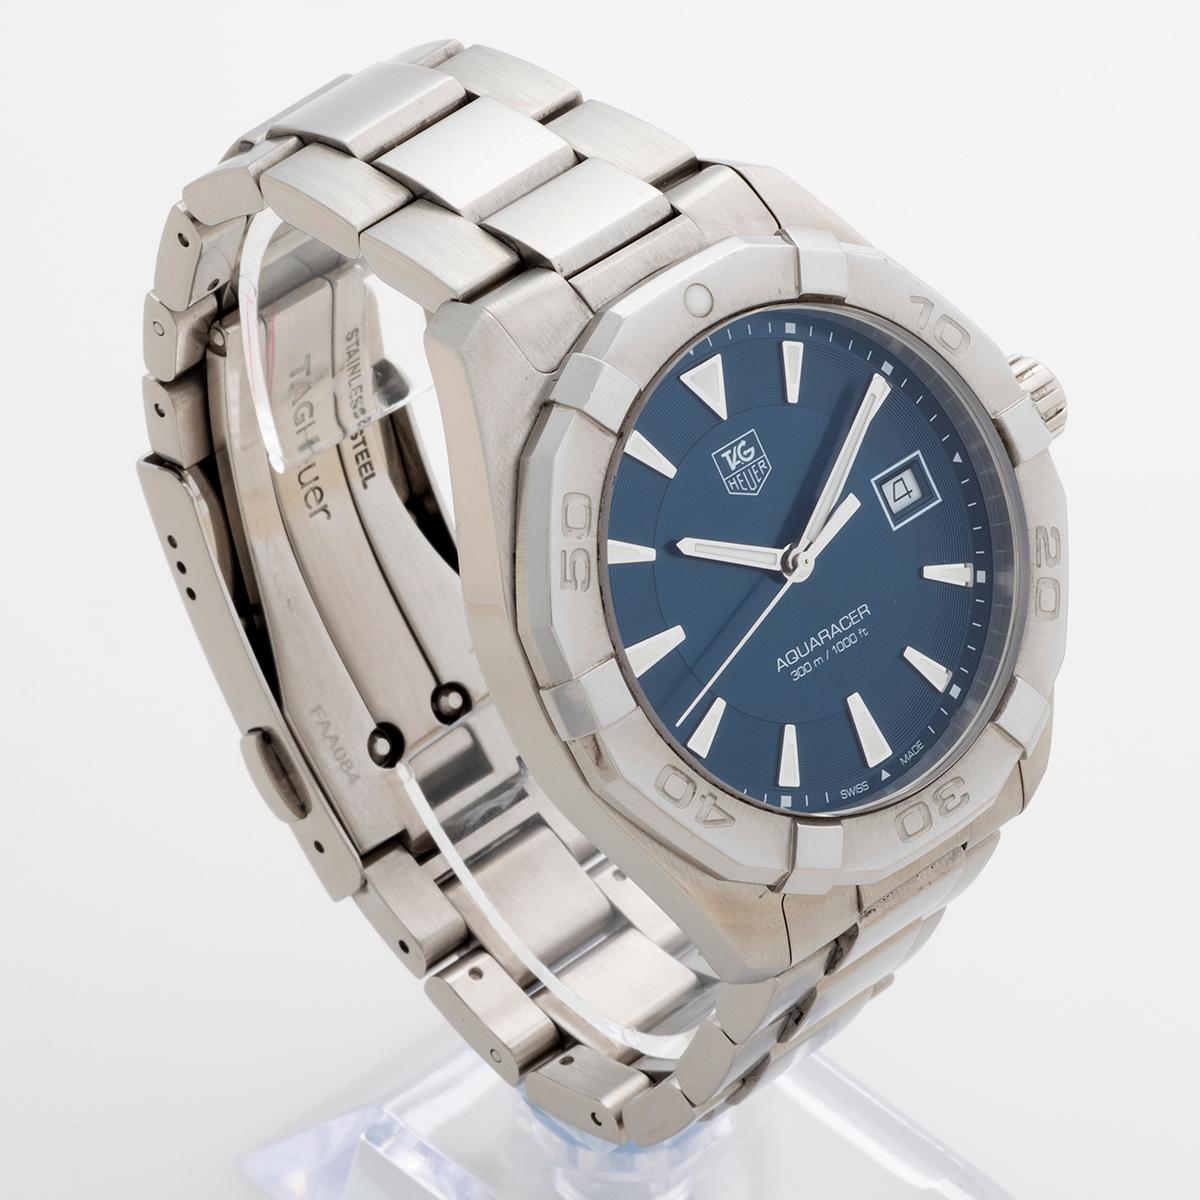 Our Tag Heuer Aquaracer reference WAY1112 features a 41mm stainless steel case with very attractive blue dial and date function, with stainless steel bracelet and is powered by a quartz movement. Presented in outstanding condition , with only light